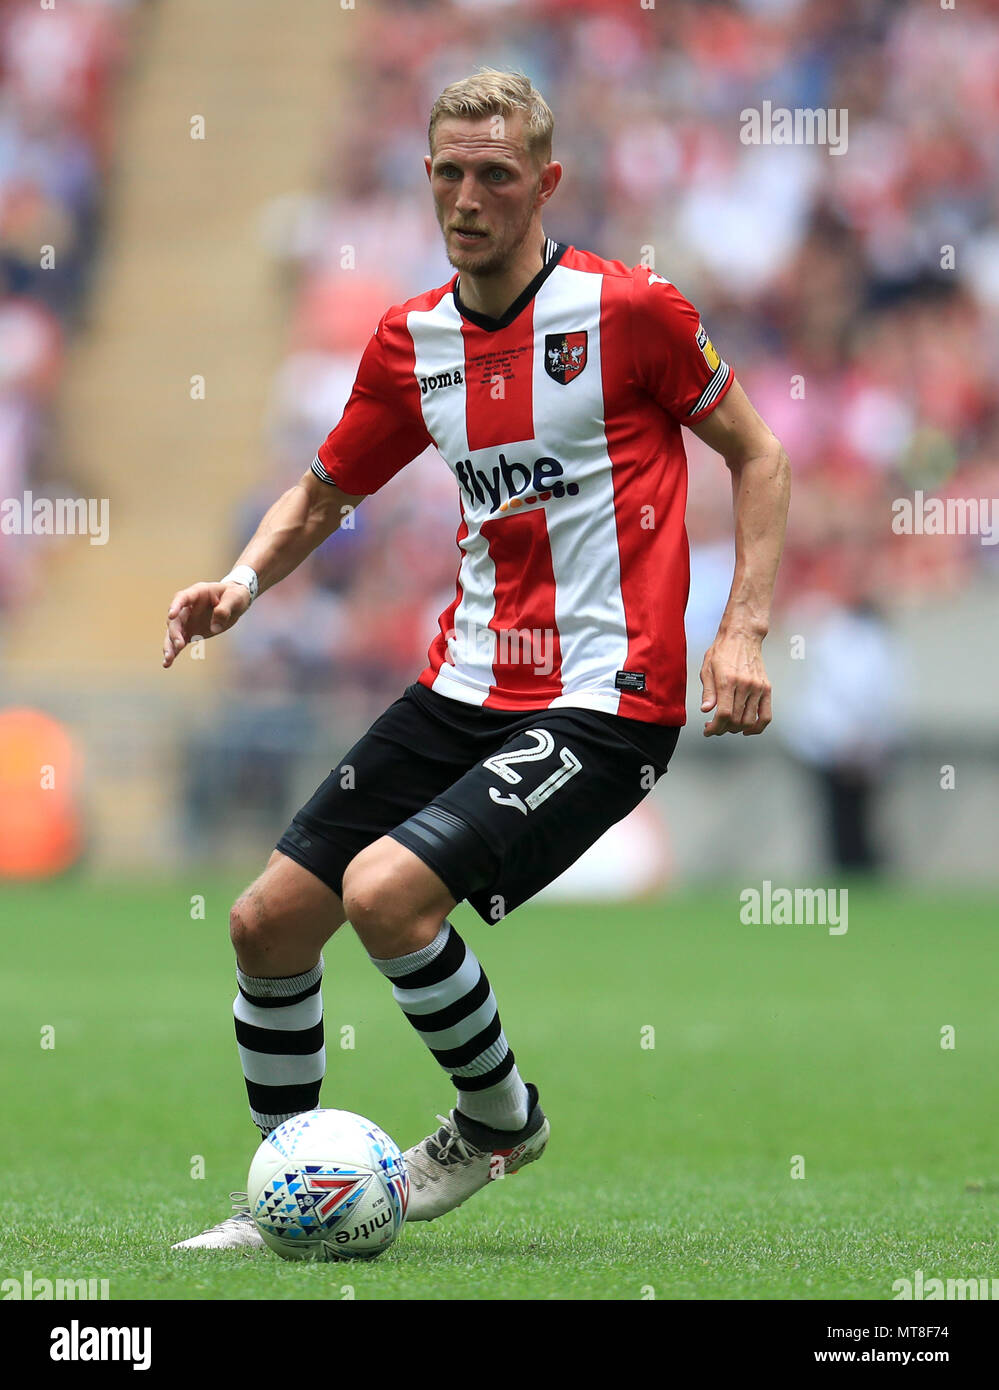 Exeter City's Dean Moxey during the Sky Bet League Two Final at Wembley Stadium, London. PRESS ASSOCIATION Photo. Picture date: Monday May 28, 2018. See PA story SOCCER League Two. Photo credit should read: Mike Egerton/PA Wire. RESTRICTIONS: No use with unauthorised audio, video, data, fixture lists, club/league logos or 'live' services. Online in-match use limited to 75 images, no video emulation. No use in betting, games or single club/league/player publications. Stock Photo